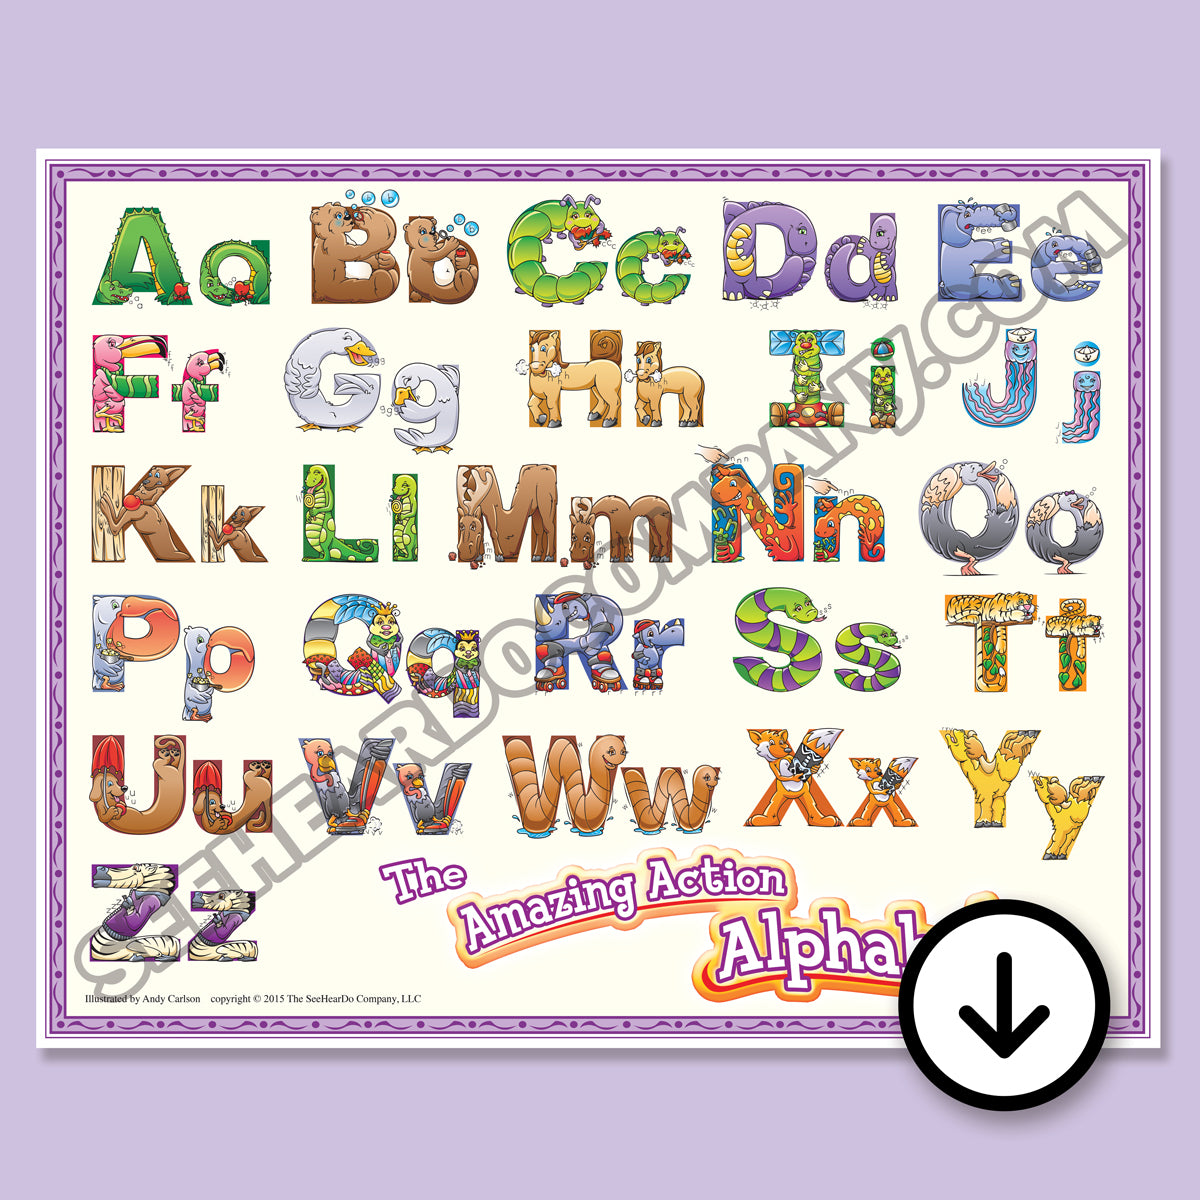 Amazing Action Alphabet Poster (Digital Download) – The Amazing